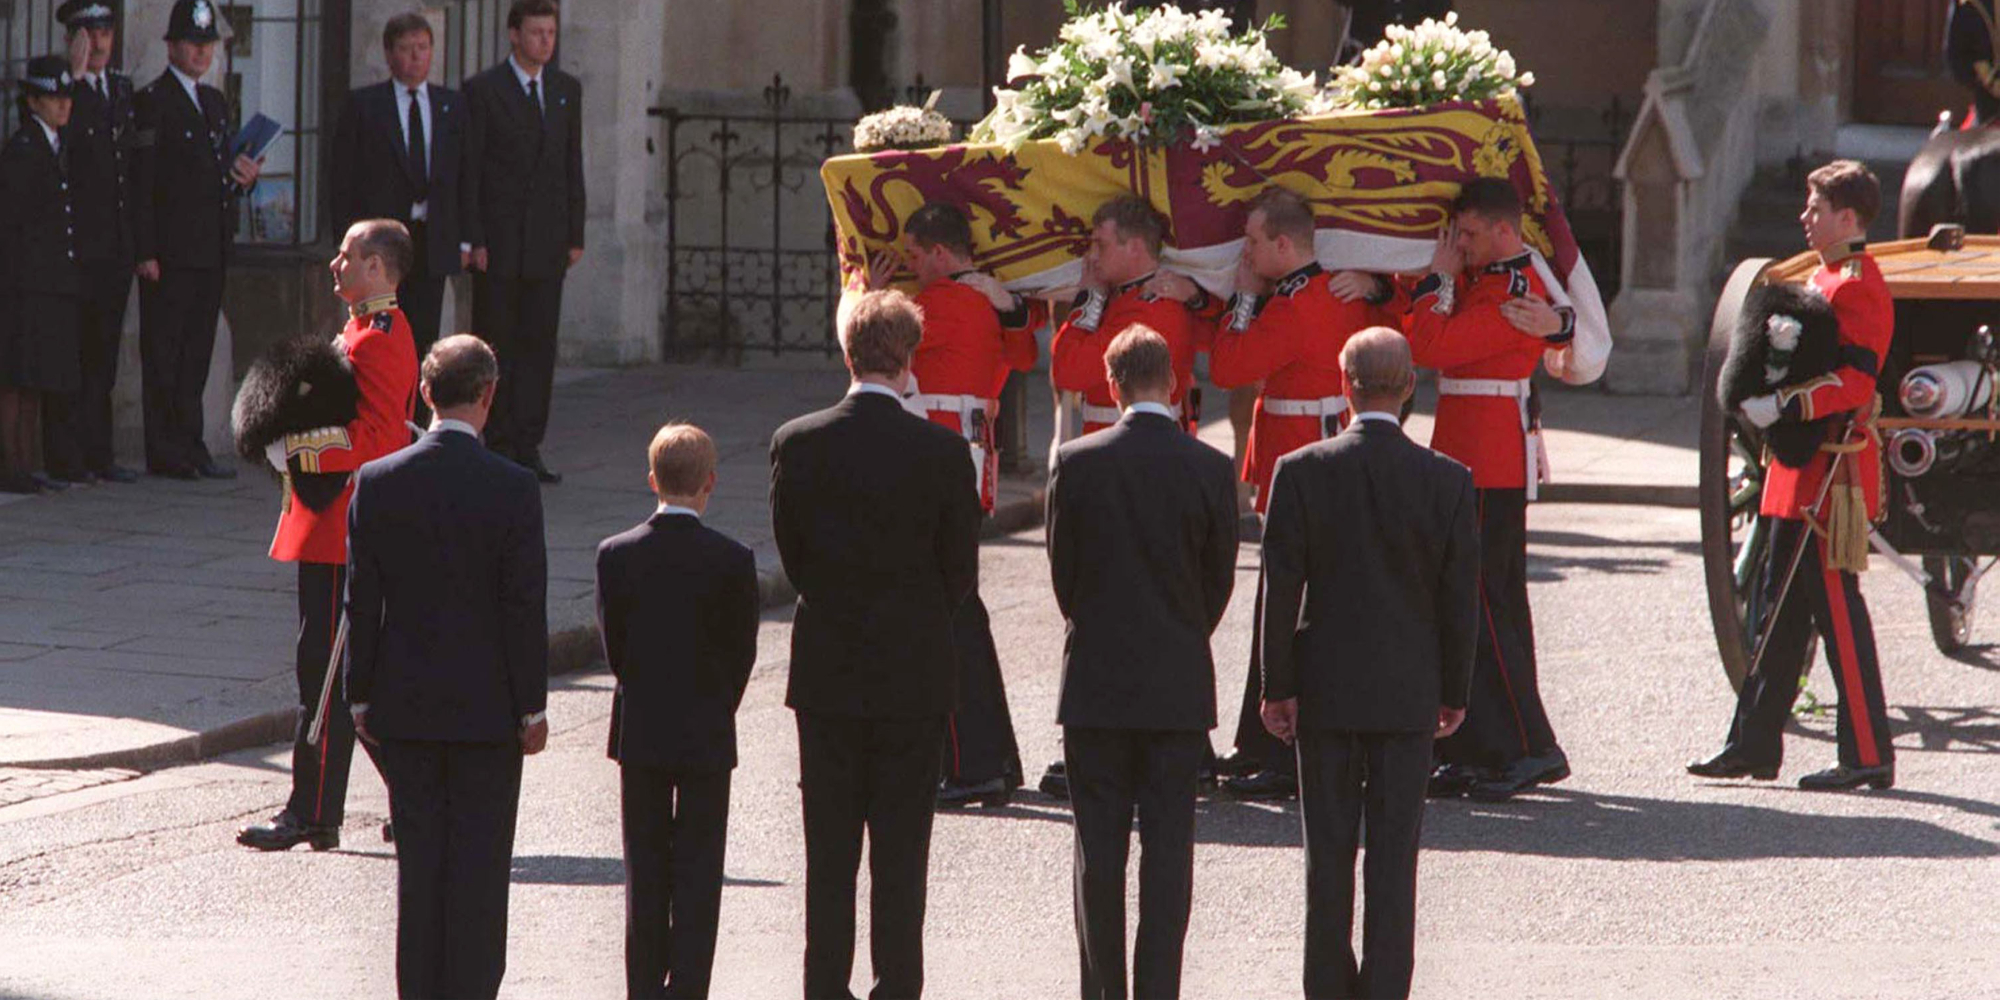 Princes Charles, Harry, William, Philip and the 9th Earl Spencer walk behind Princess Diana's casket in 1997.